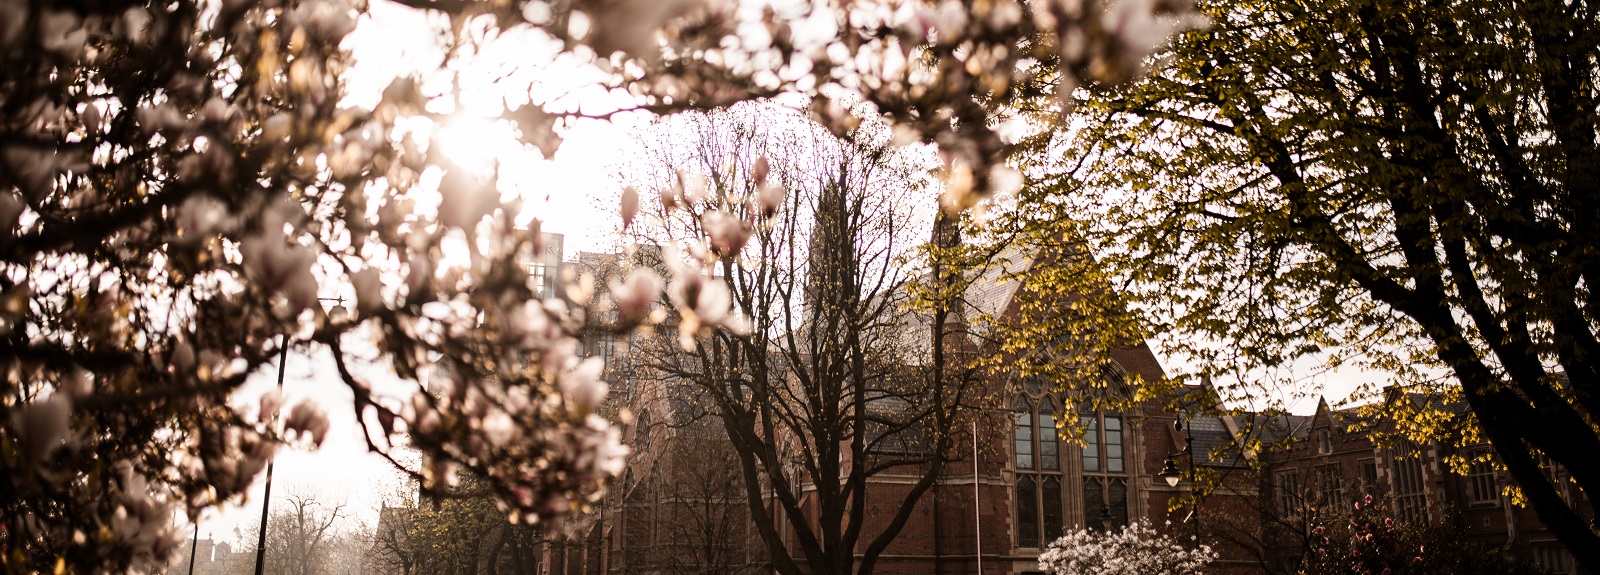 Queen's Graduate School and Main Site Tower with blossom in foreground - March 2022